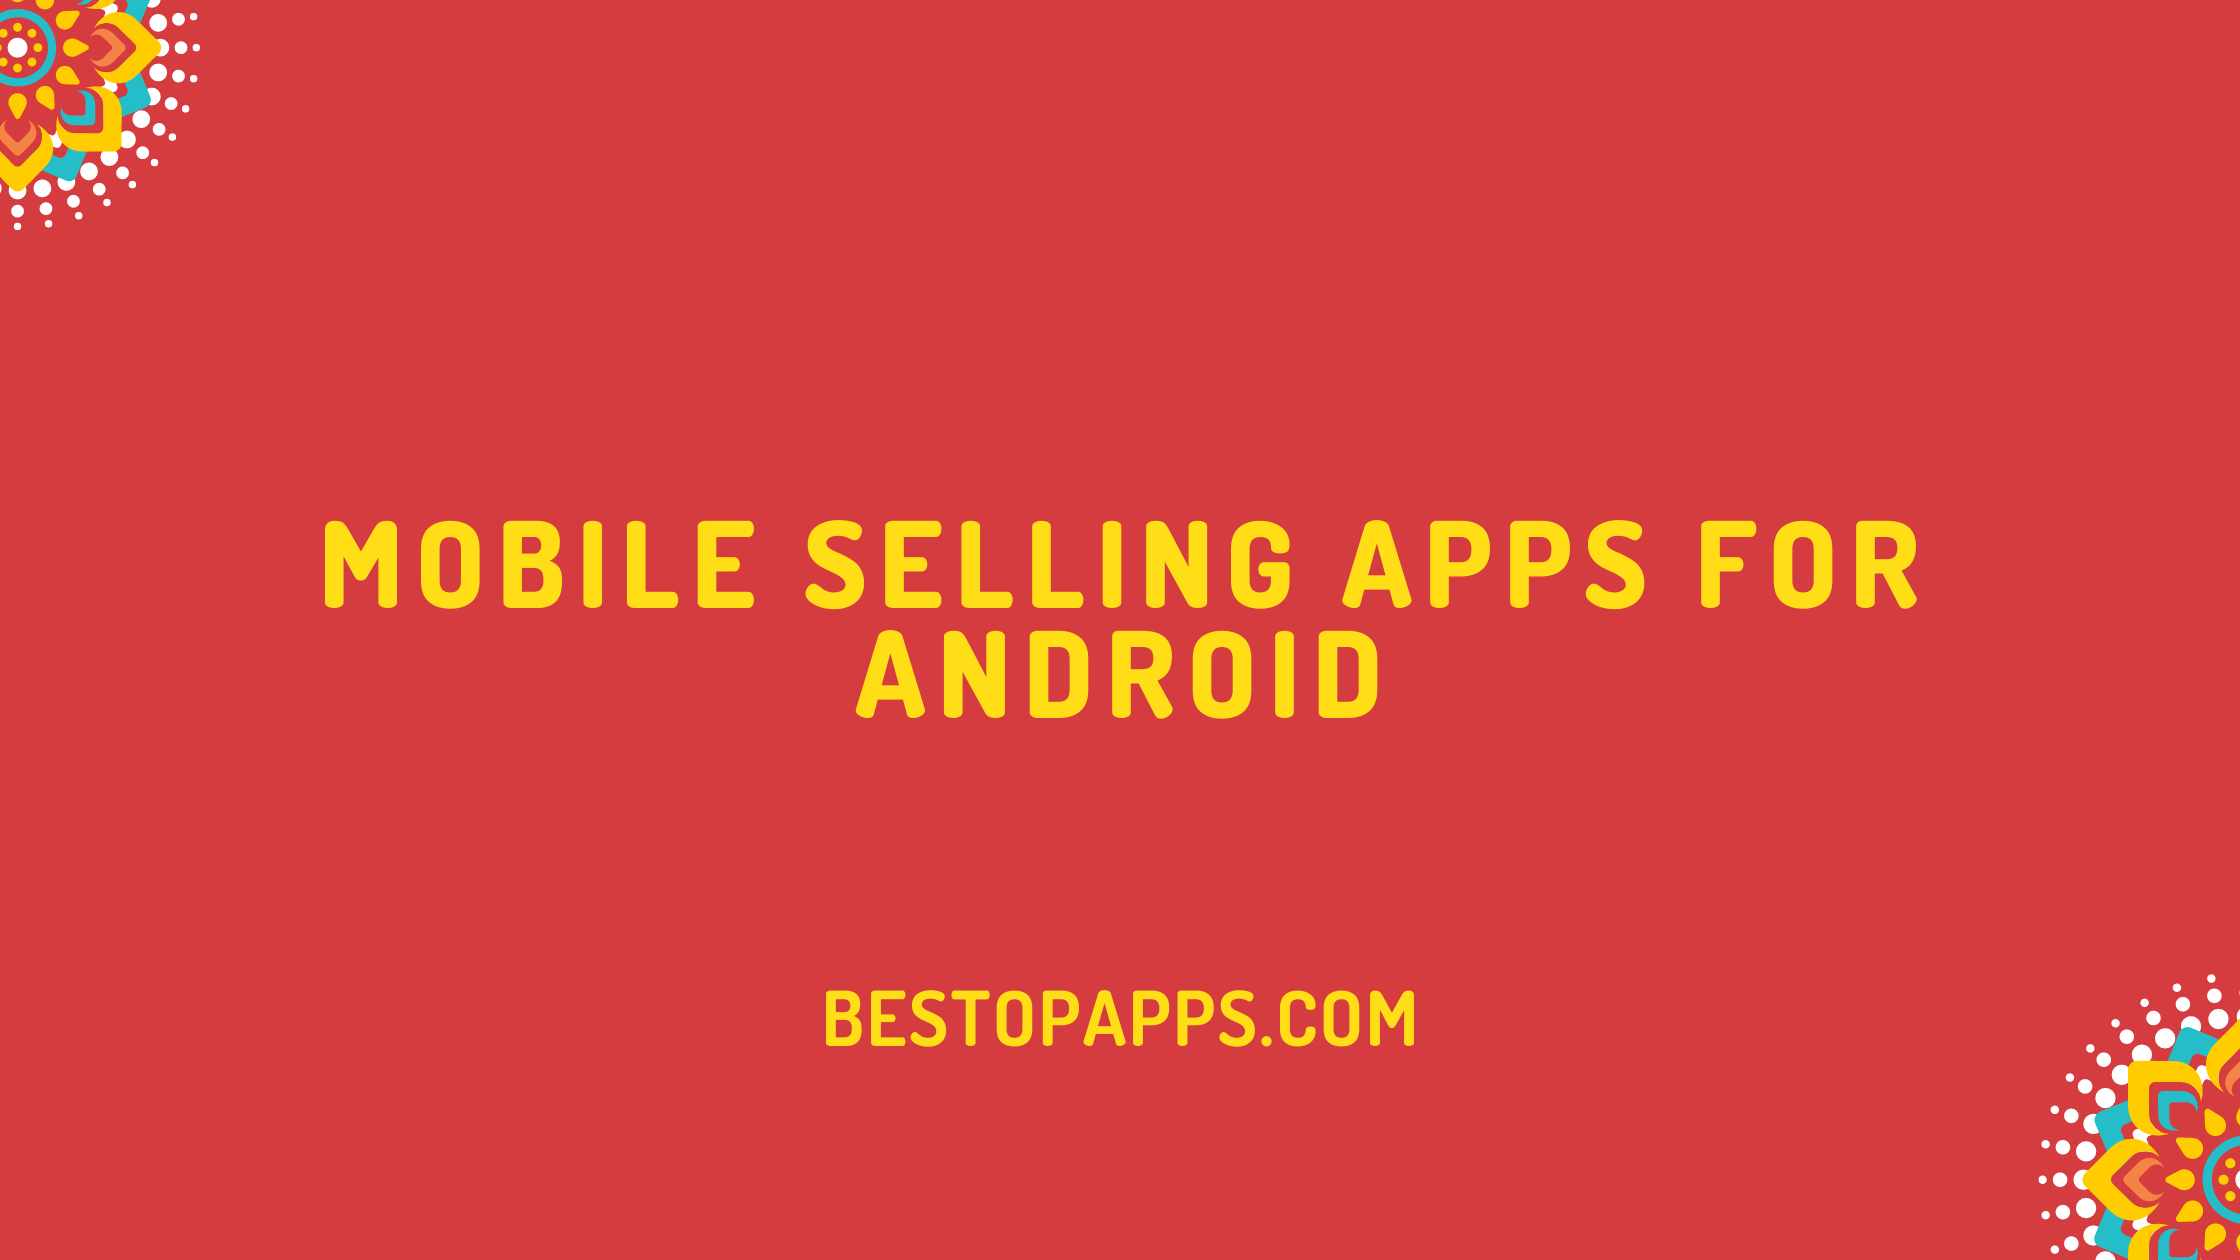 Mobile Selling Apps for Android